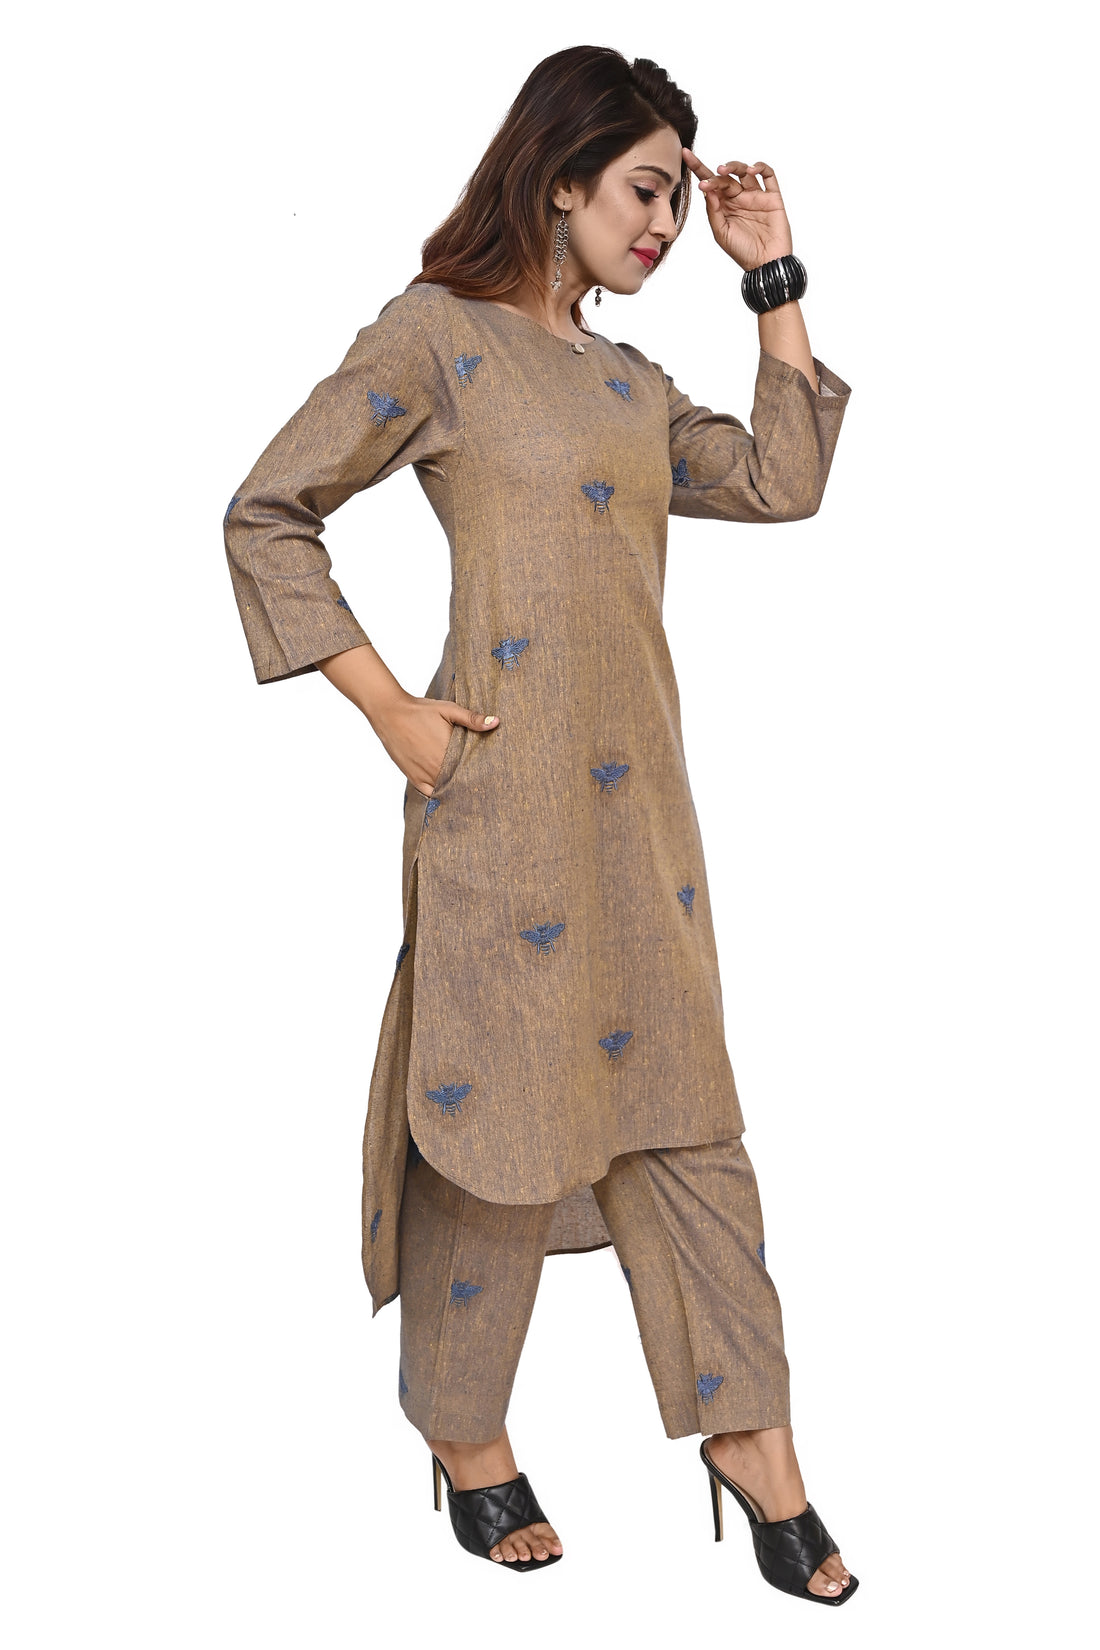 Nirmal online Premium cotton co-ord set kurti for Women in Brown colour with Honey bee embroidery